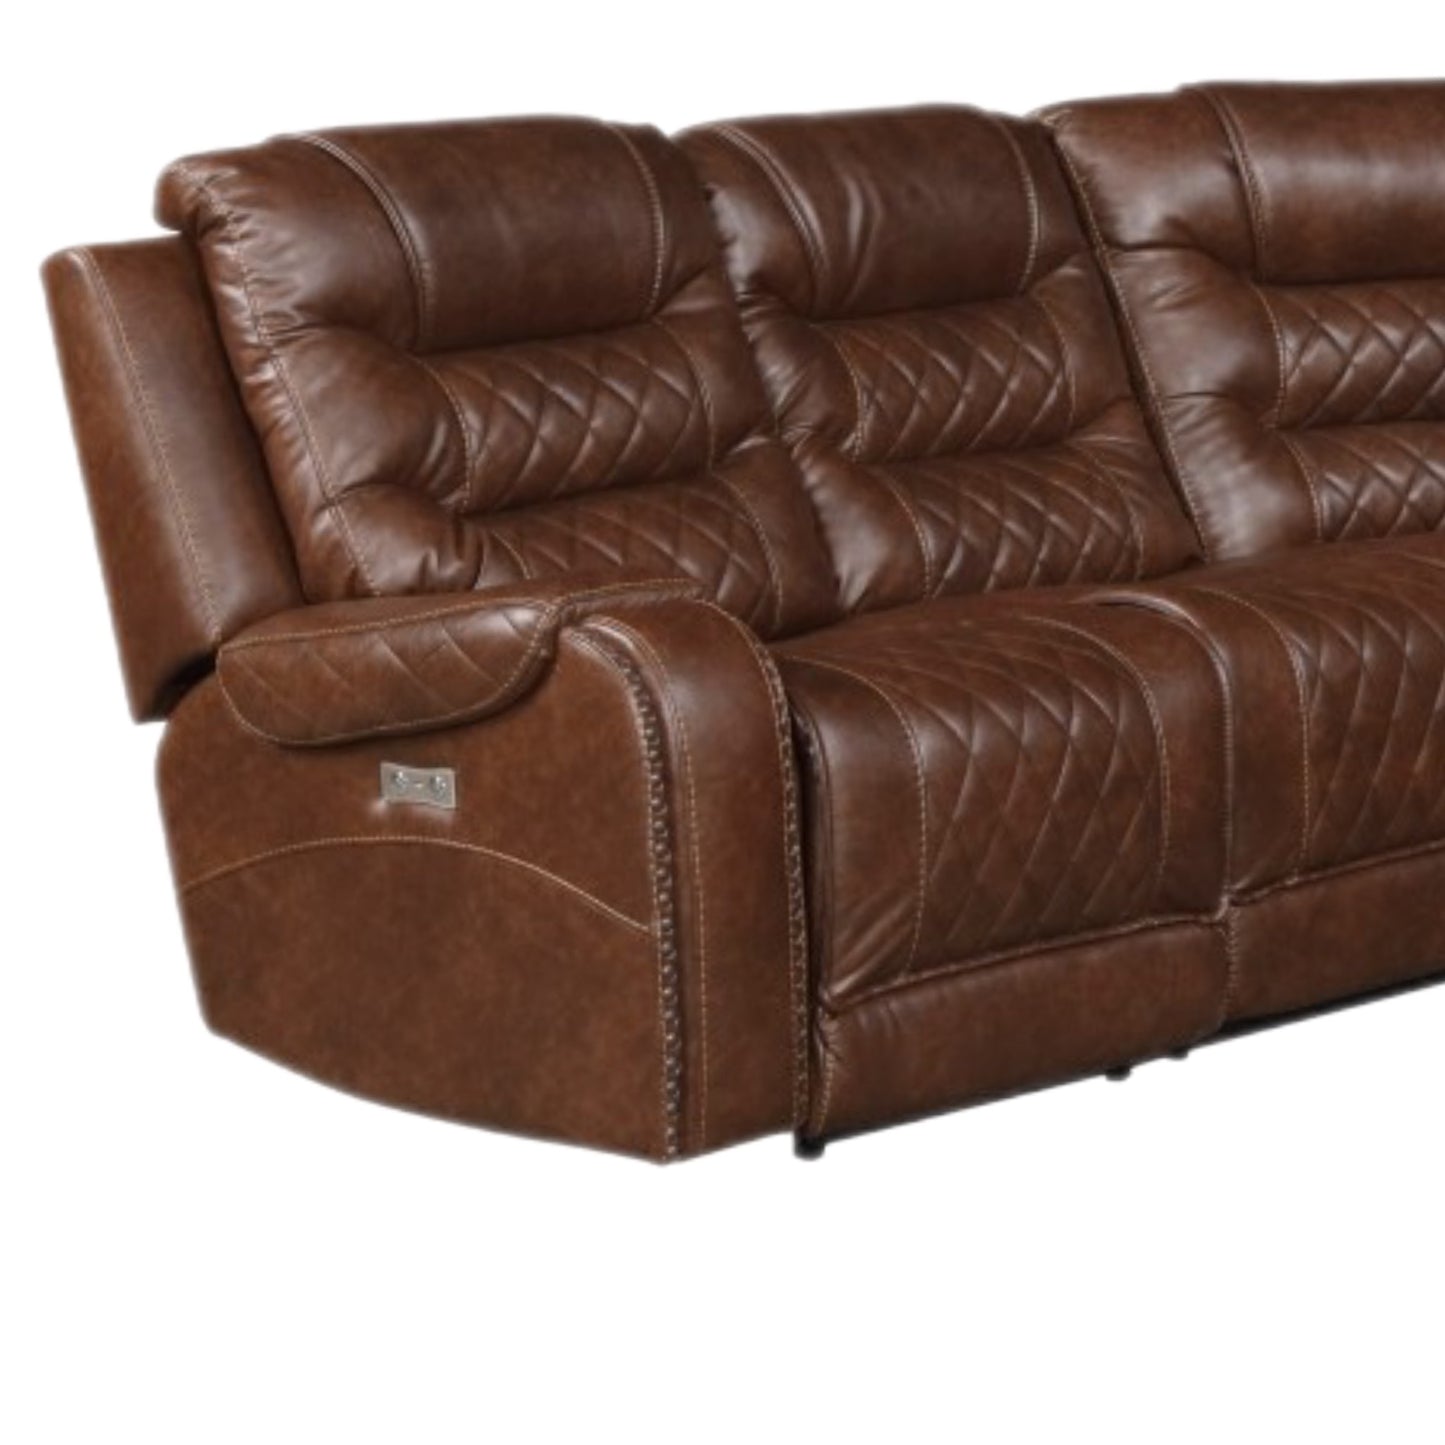 MCM New Luxurious Designer Nailhead 7 Seater Modular Power Sectional BACK ORDERED UNTIL FEB 2023